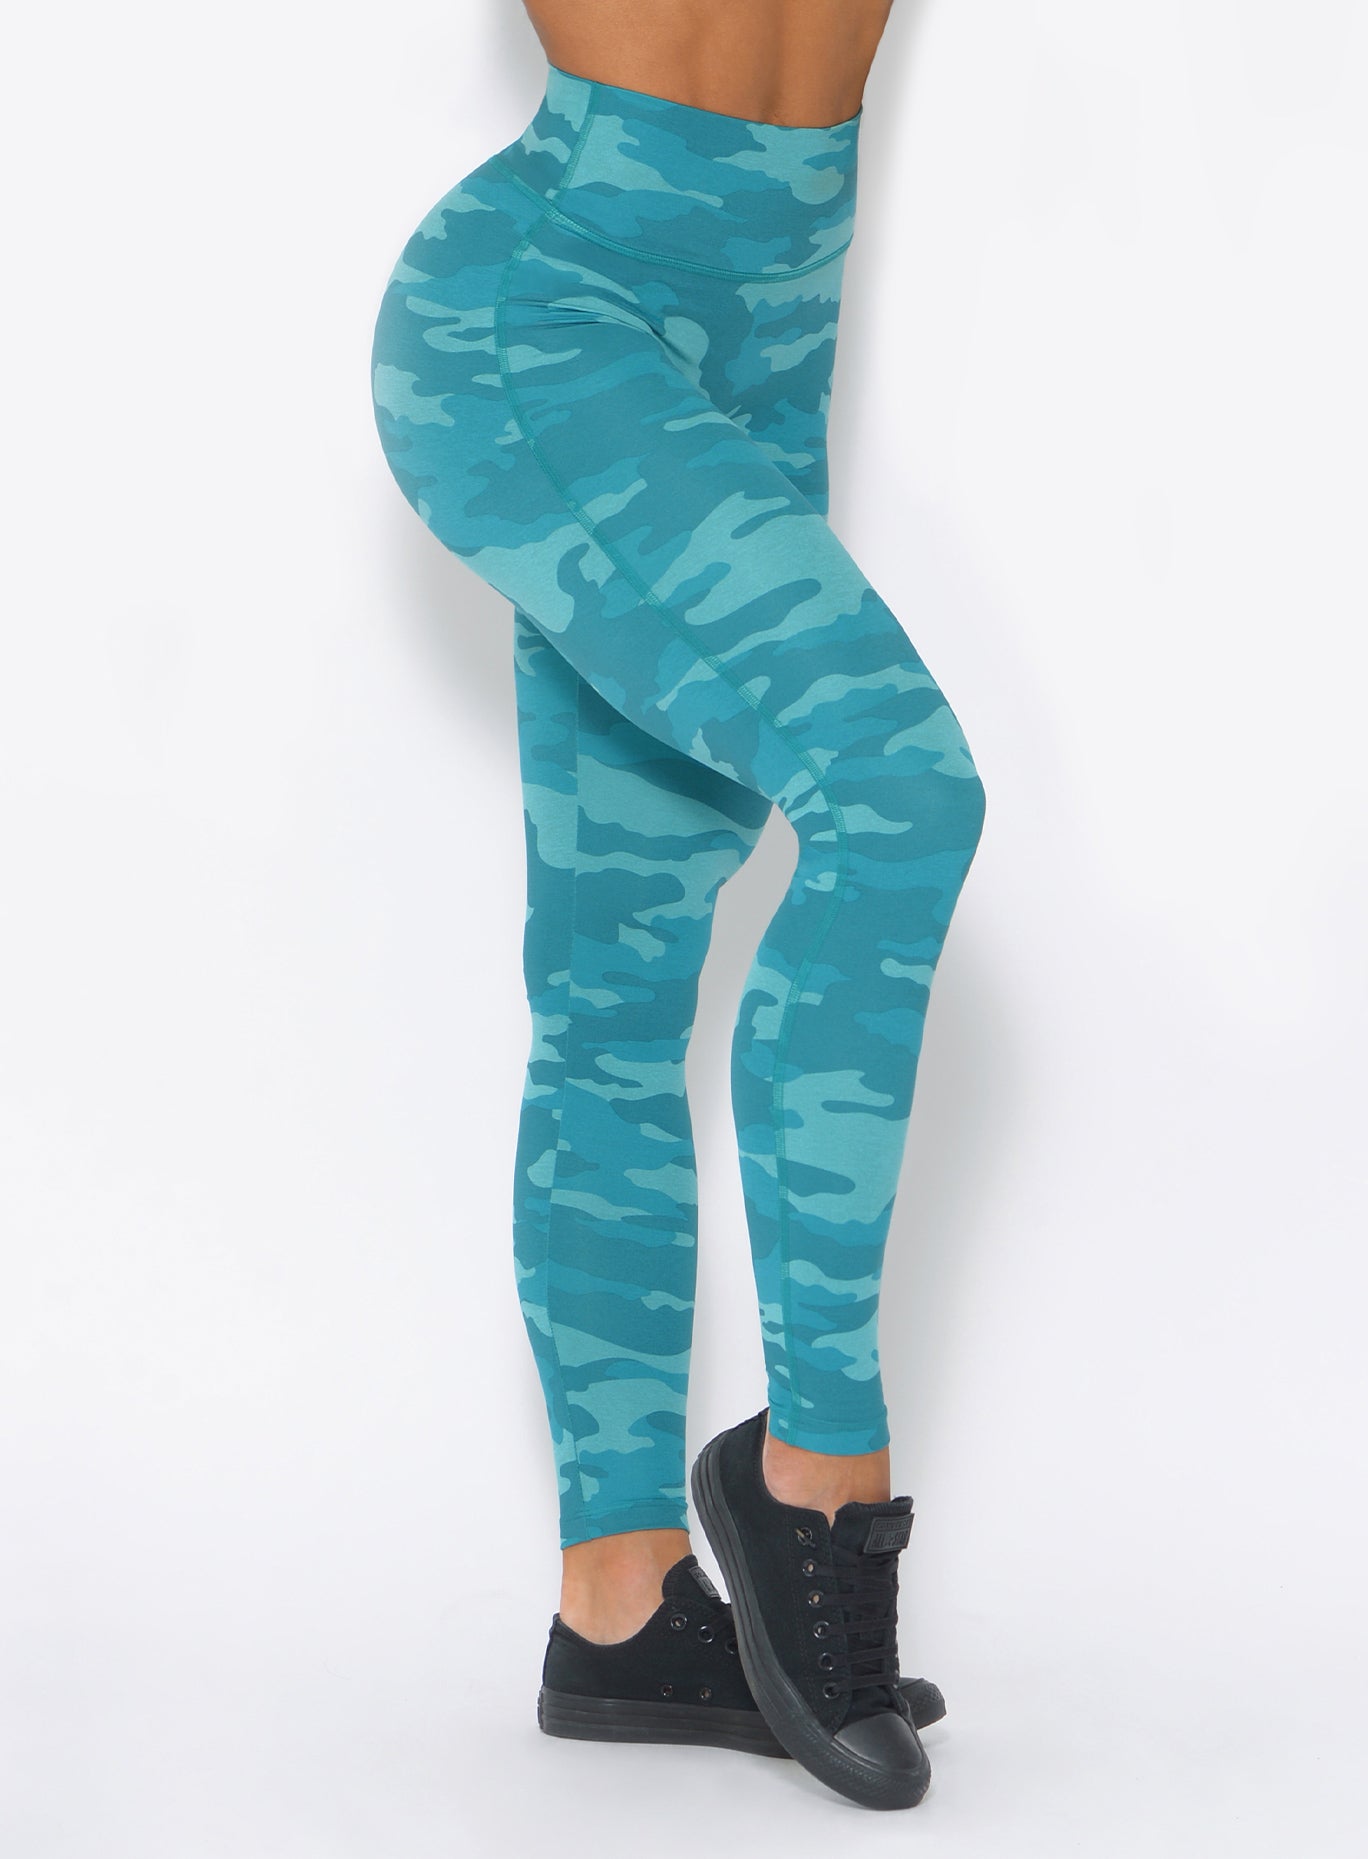 Zoomed in view of the model wearing our fit camo leggings in teal color